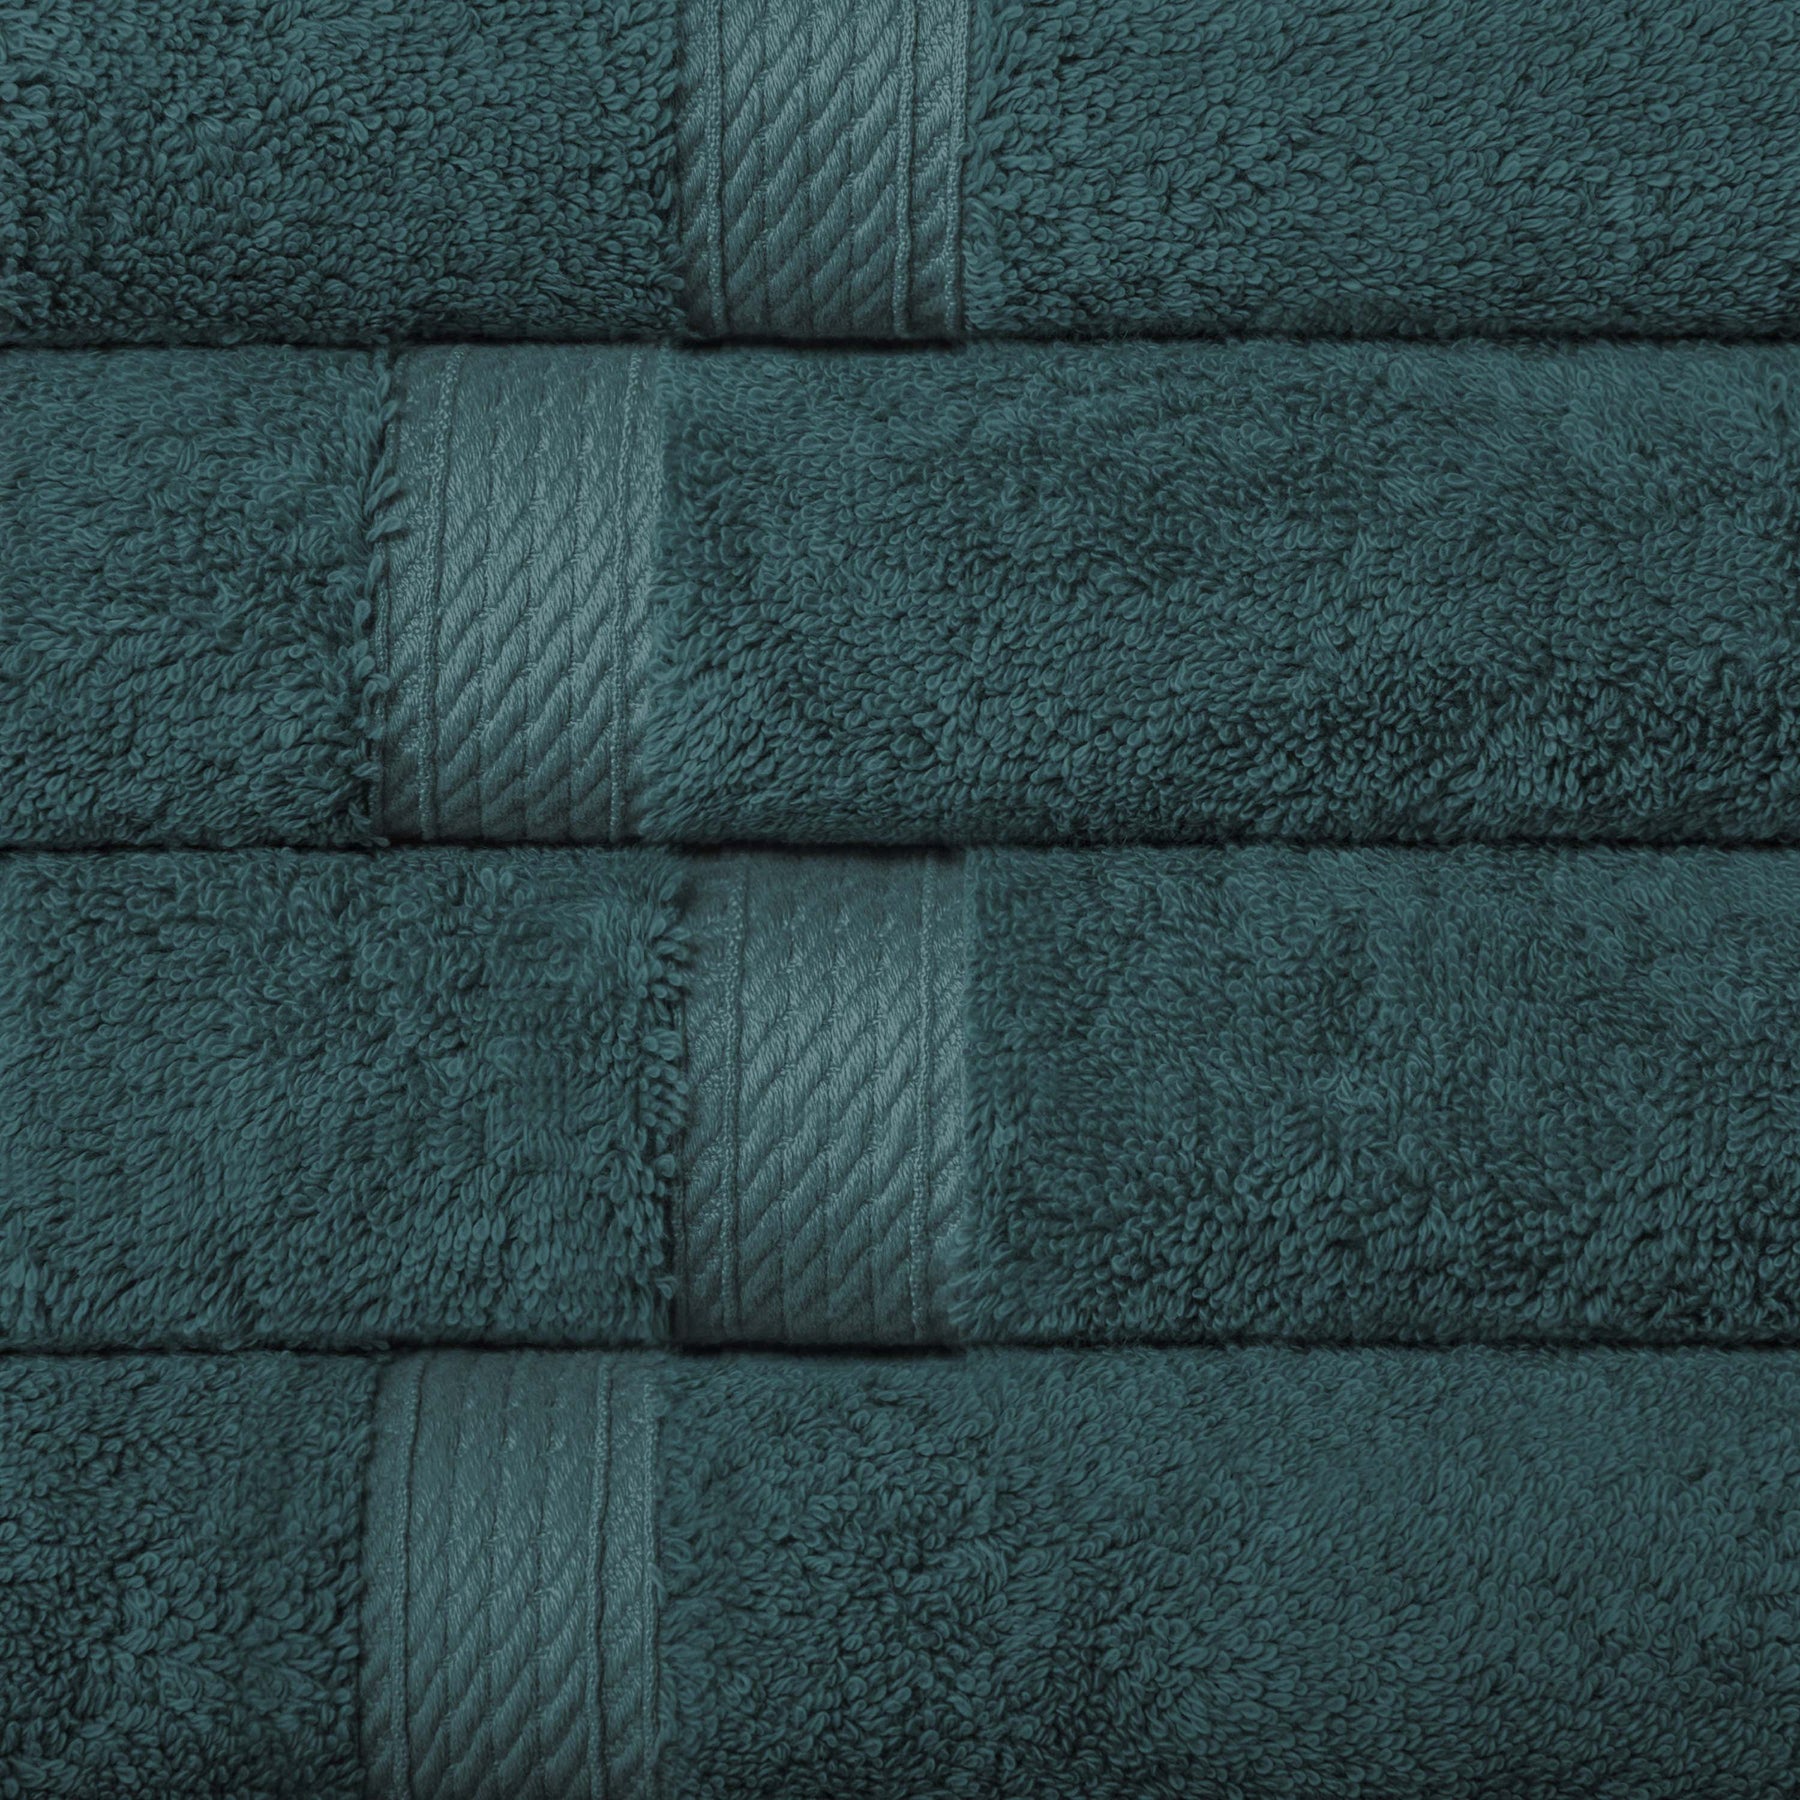 Superior Egyptian Cotton Plush Heavyweight Absorbent Luxury Soft 9-Piece Towel Set - Teal